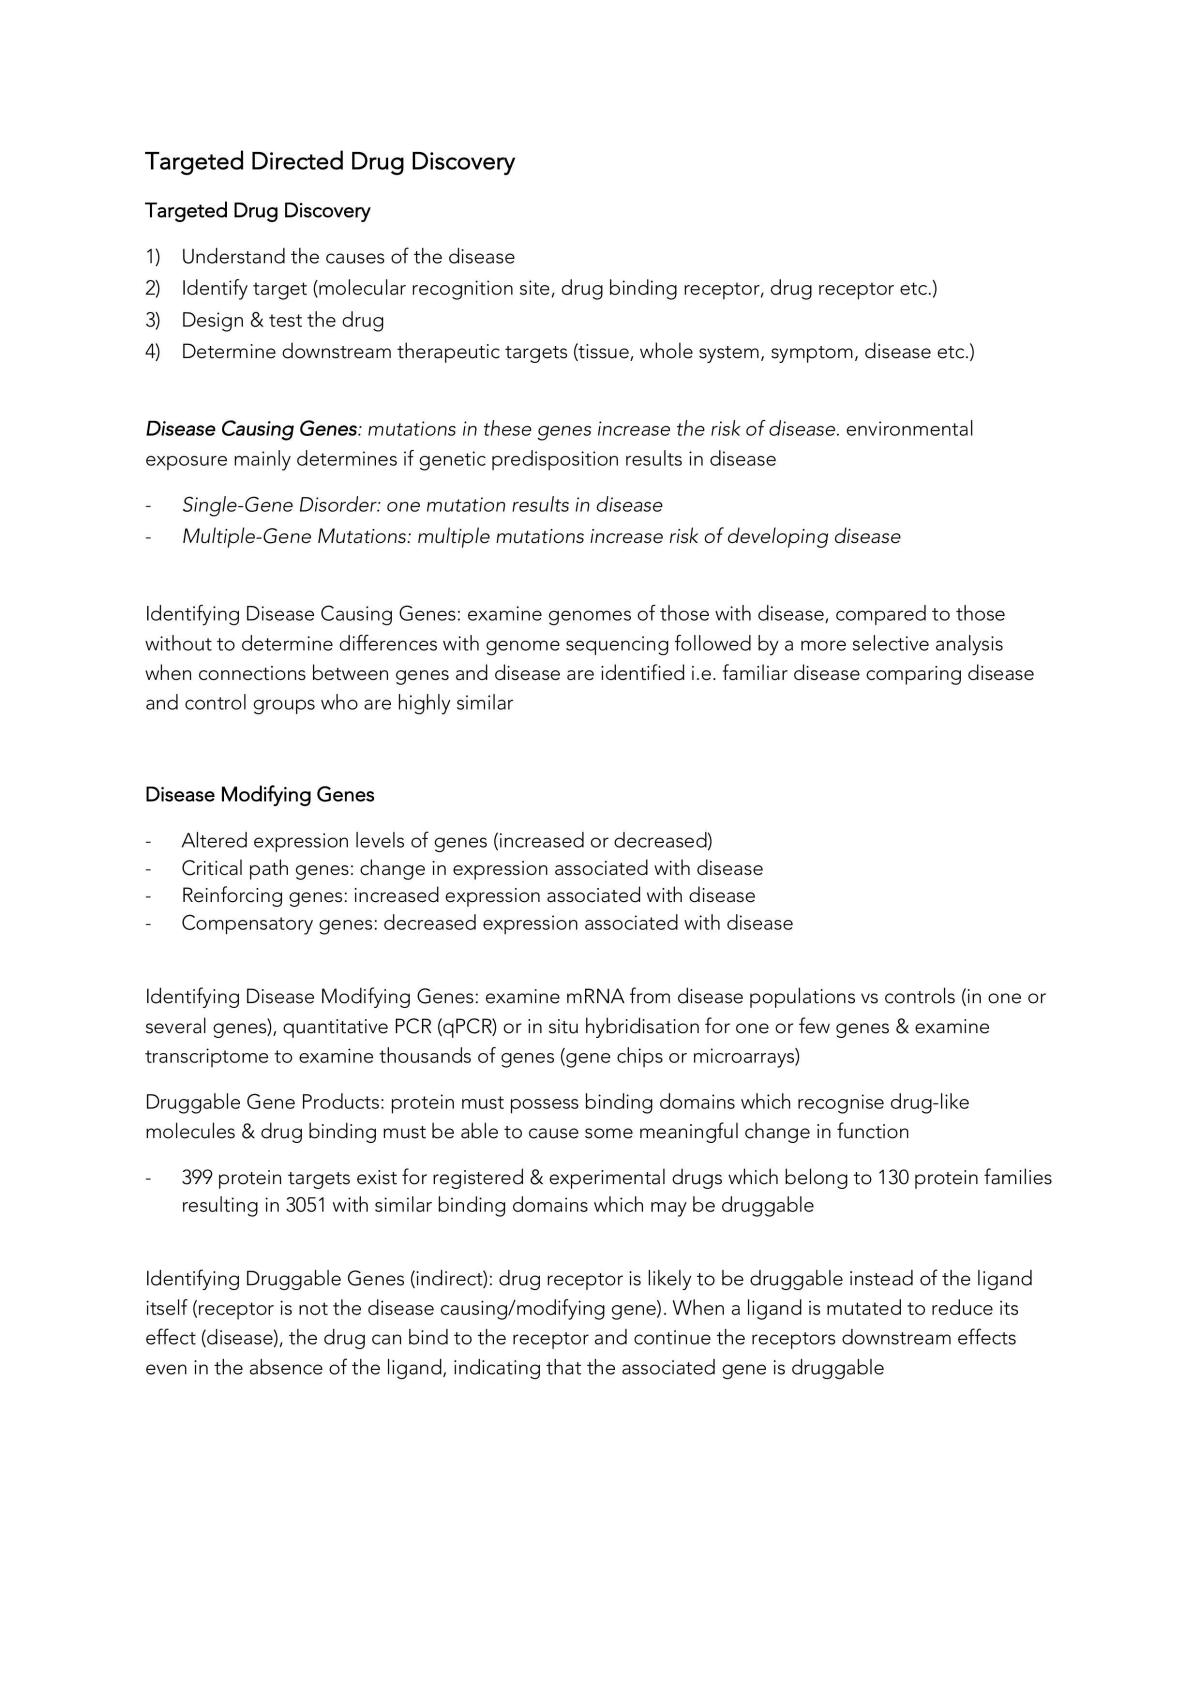 HMM304 Therapeutic Development - Complete Unit Notes (HD) - Page 4